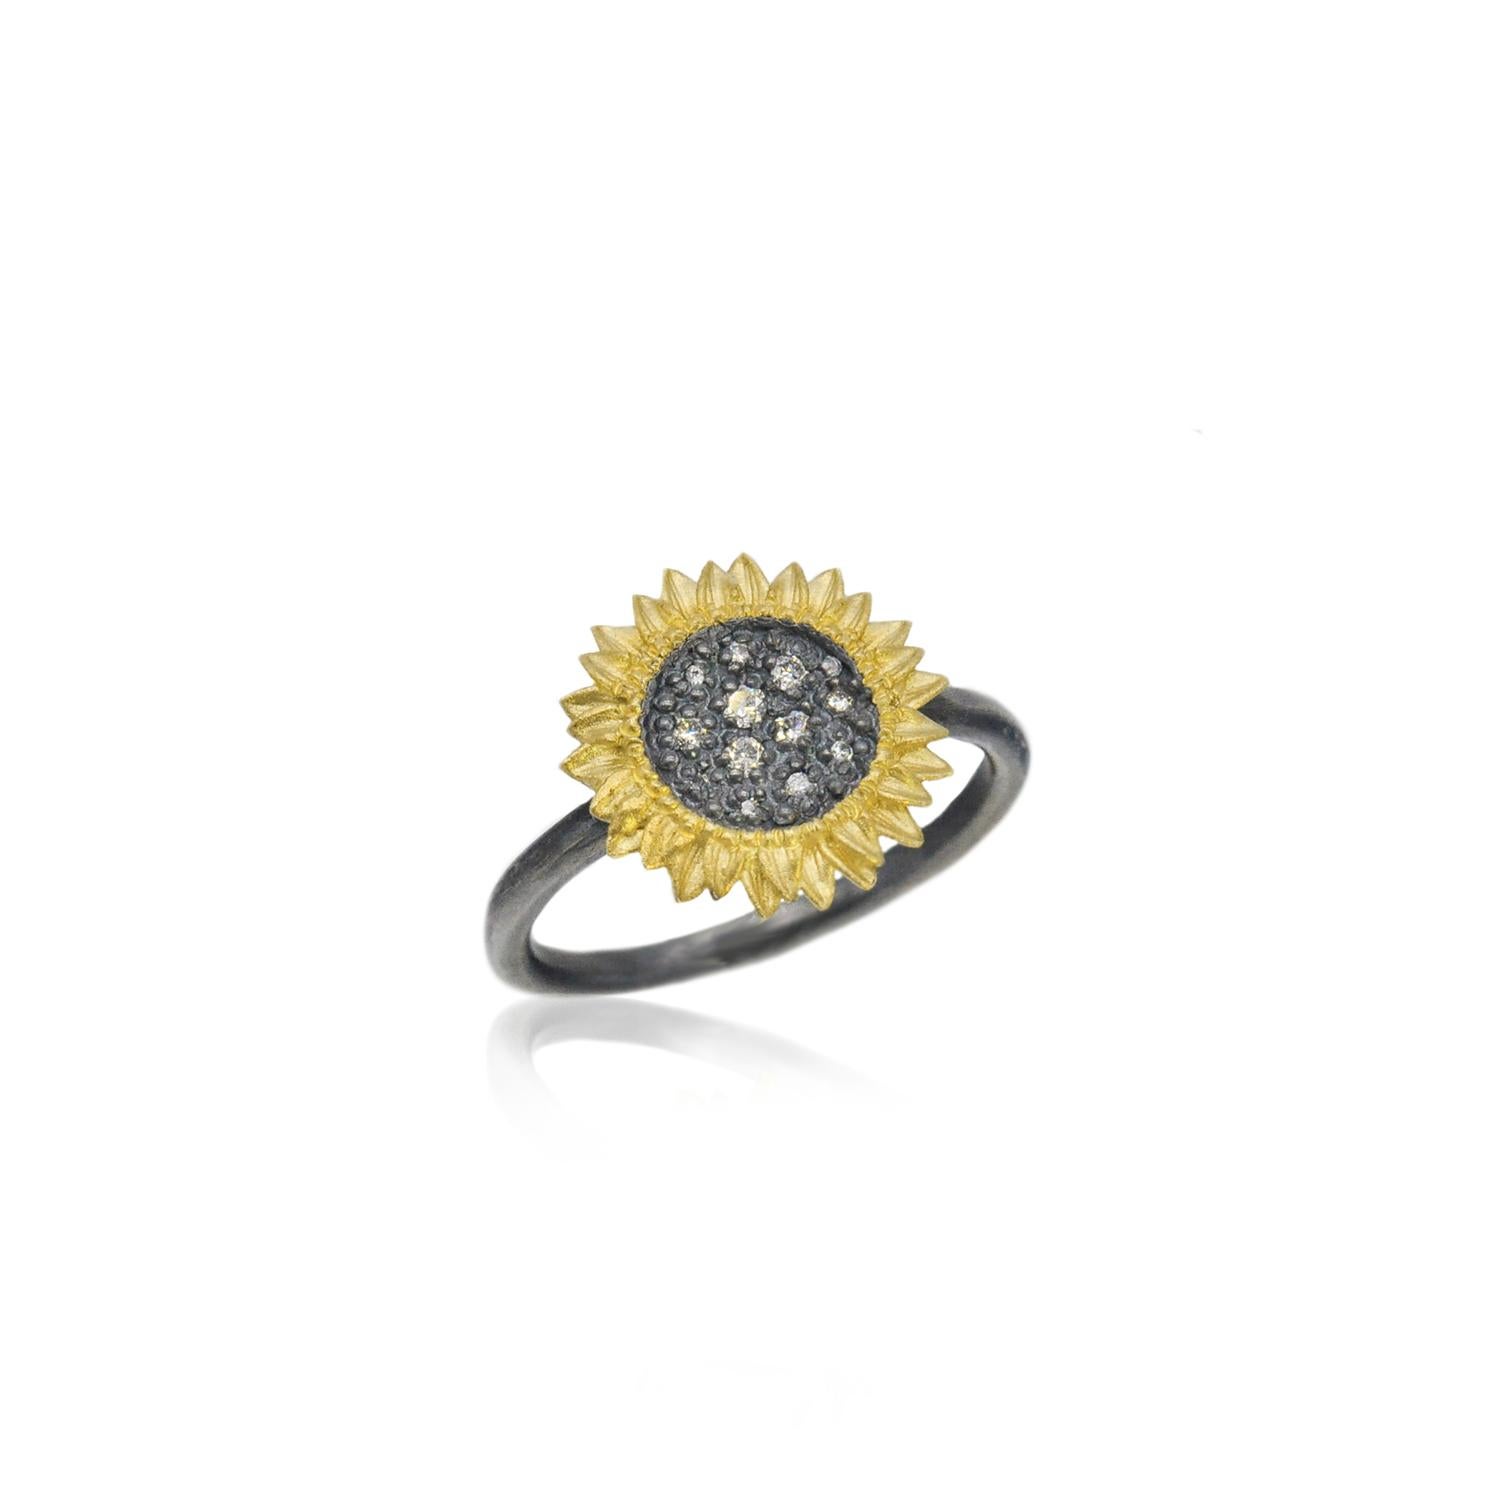 For Sale:  Sunflower Ring with Pave Set Diamonds in Oxidized Silver, Small 5